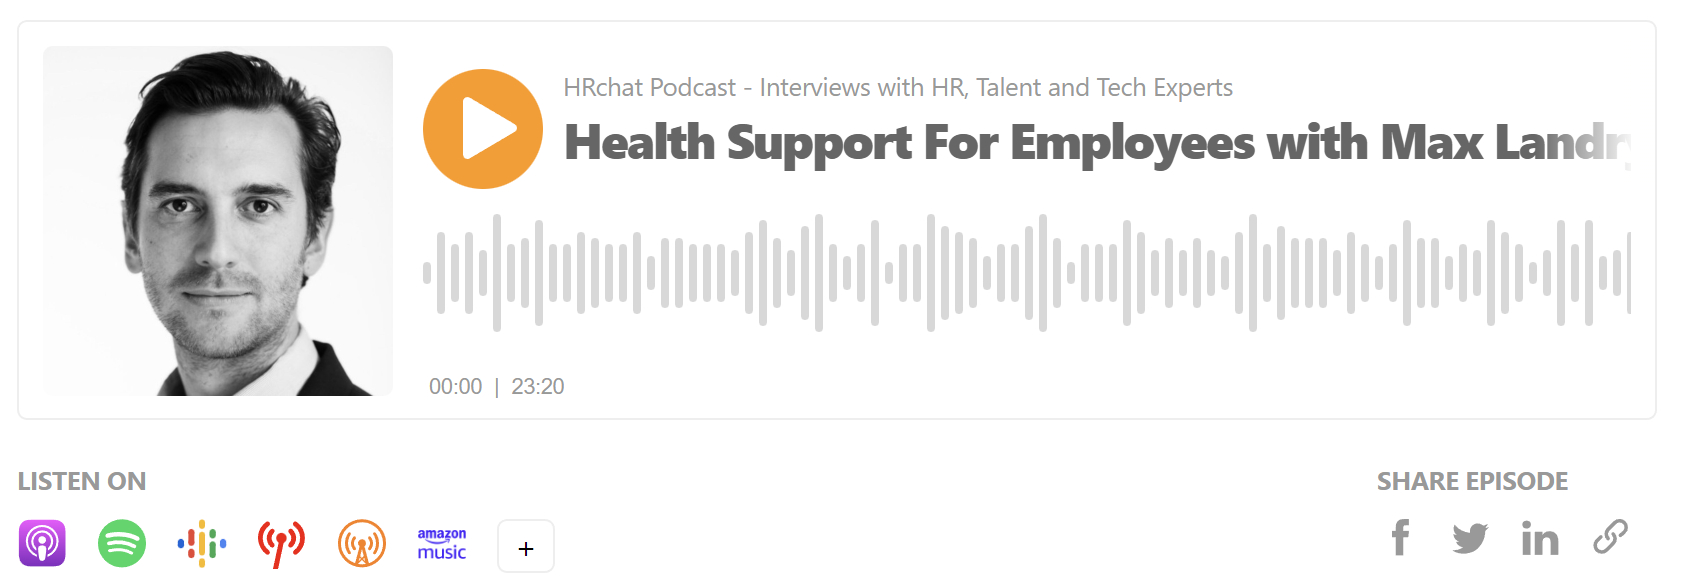 HRchat Podcast - Health Support For Employees with Max Landry, Peppy